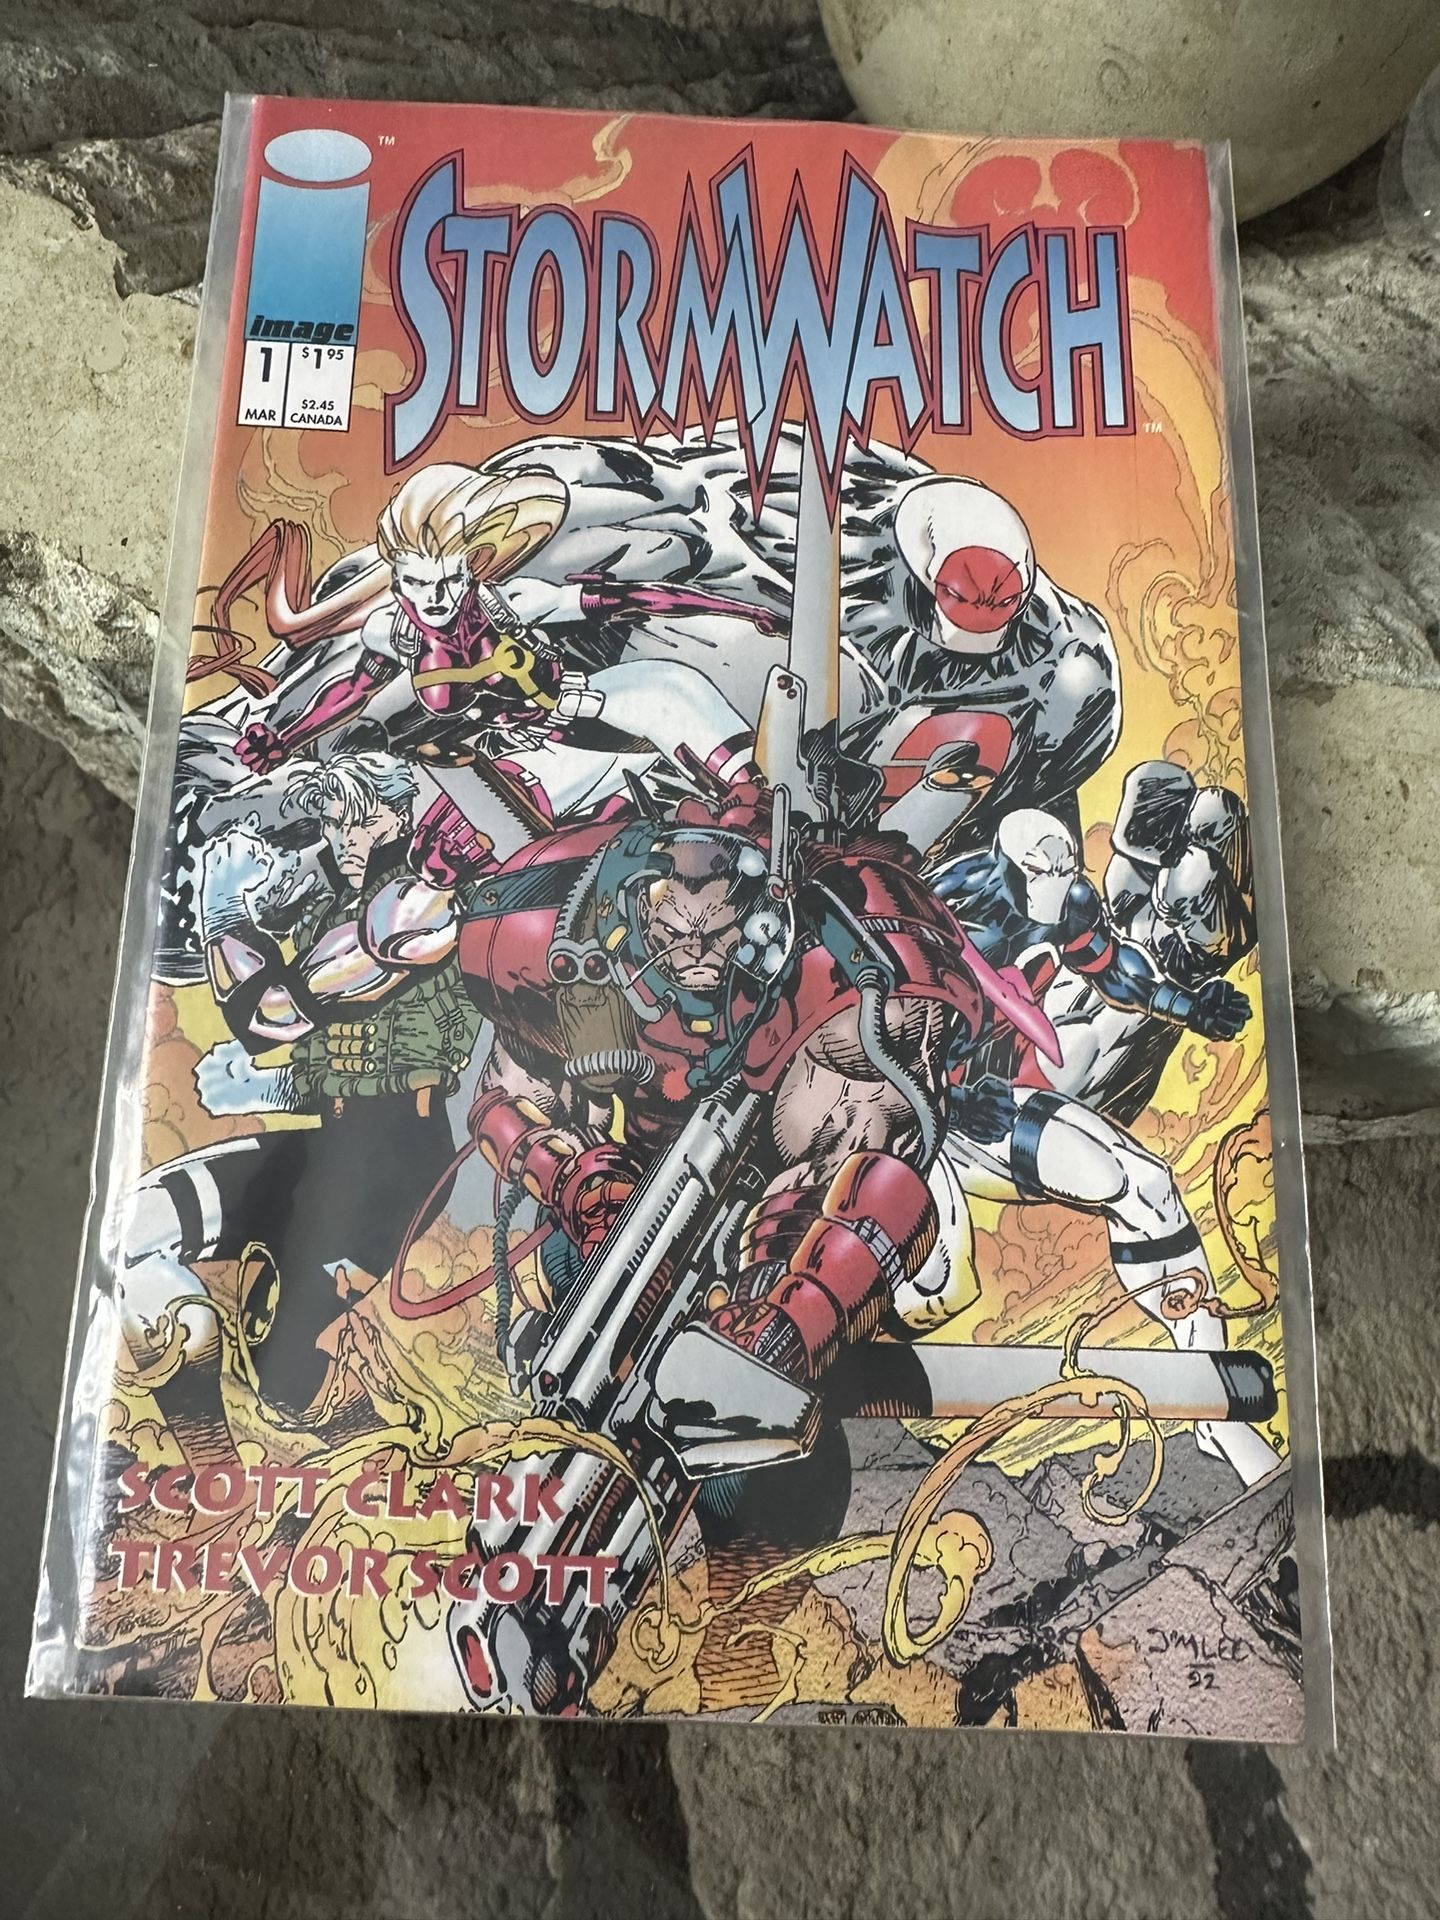 Stormwatch # 1 - Image - 1993 - Cover A - Jim Lee Cover - Key 1st Appearances